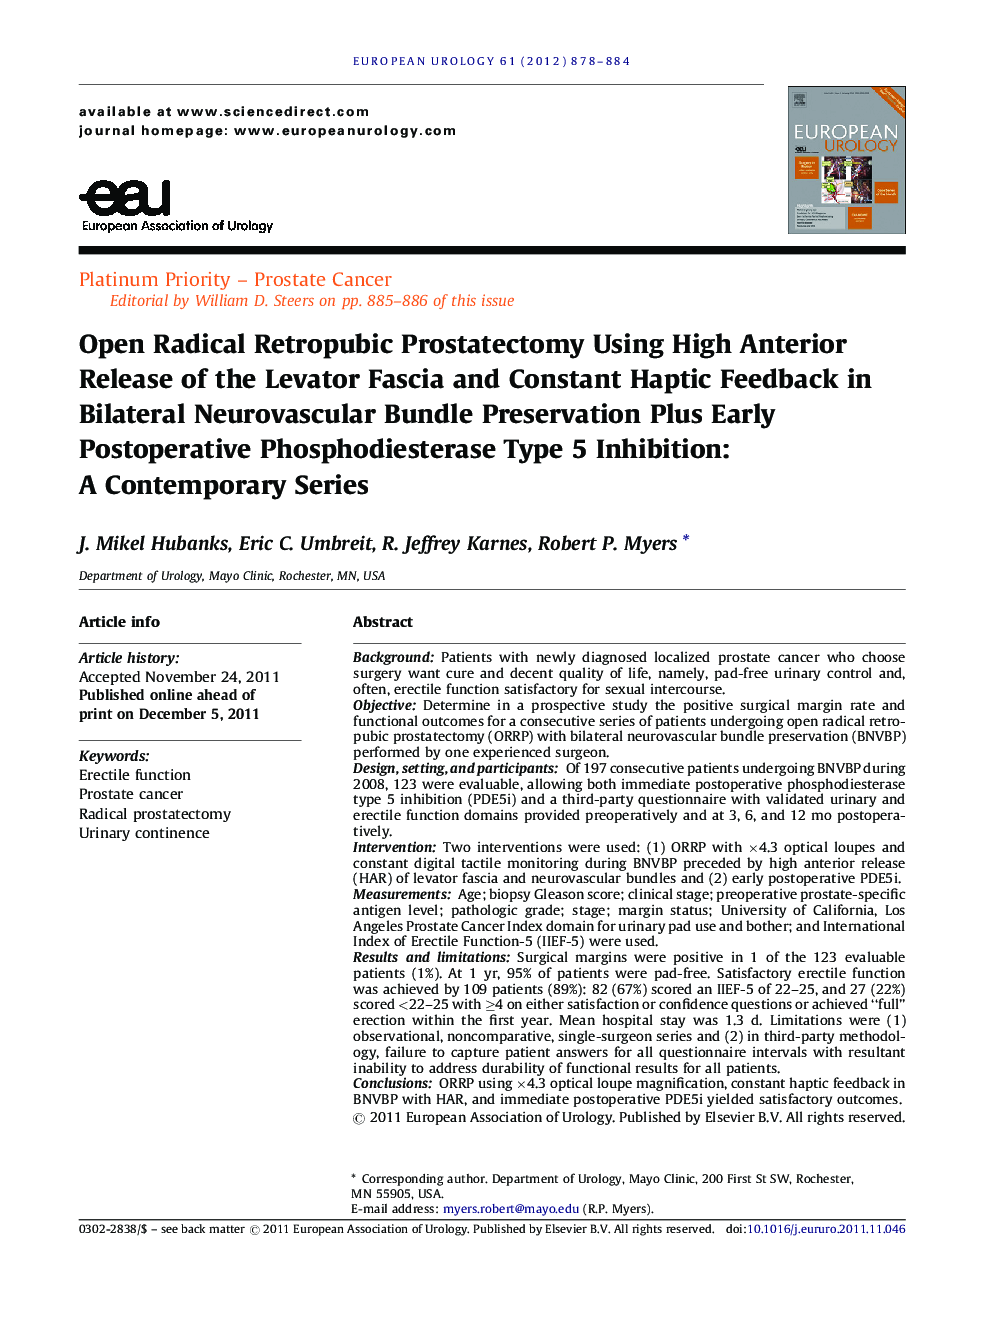 Open Radical Retropubic Prostatectomy Using High Anterior Release of the Levator Fascia and Constant Haptic Feedback in Bilateral Neurovascular Bundle Preservation Plus Early Postoperative Phosphodiesterase Type 5 Inhibition: A Contemporary Series